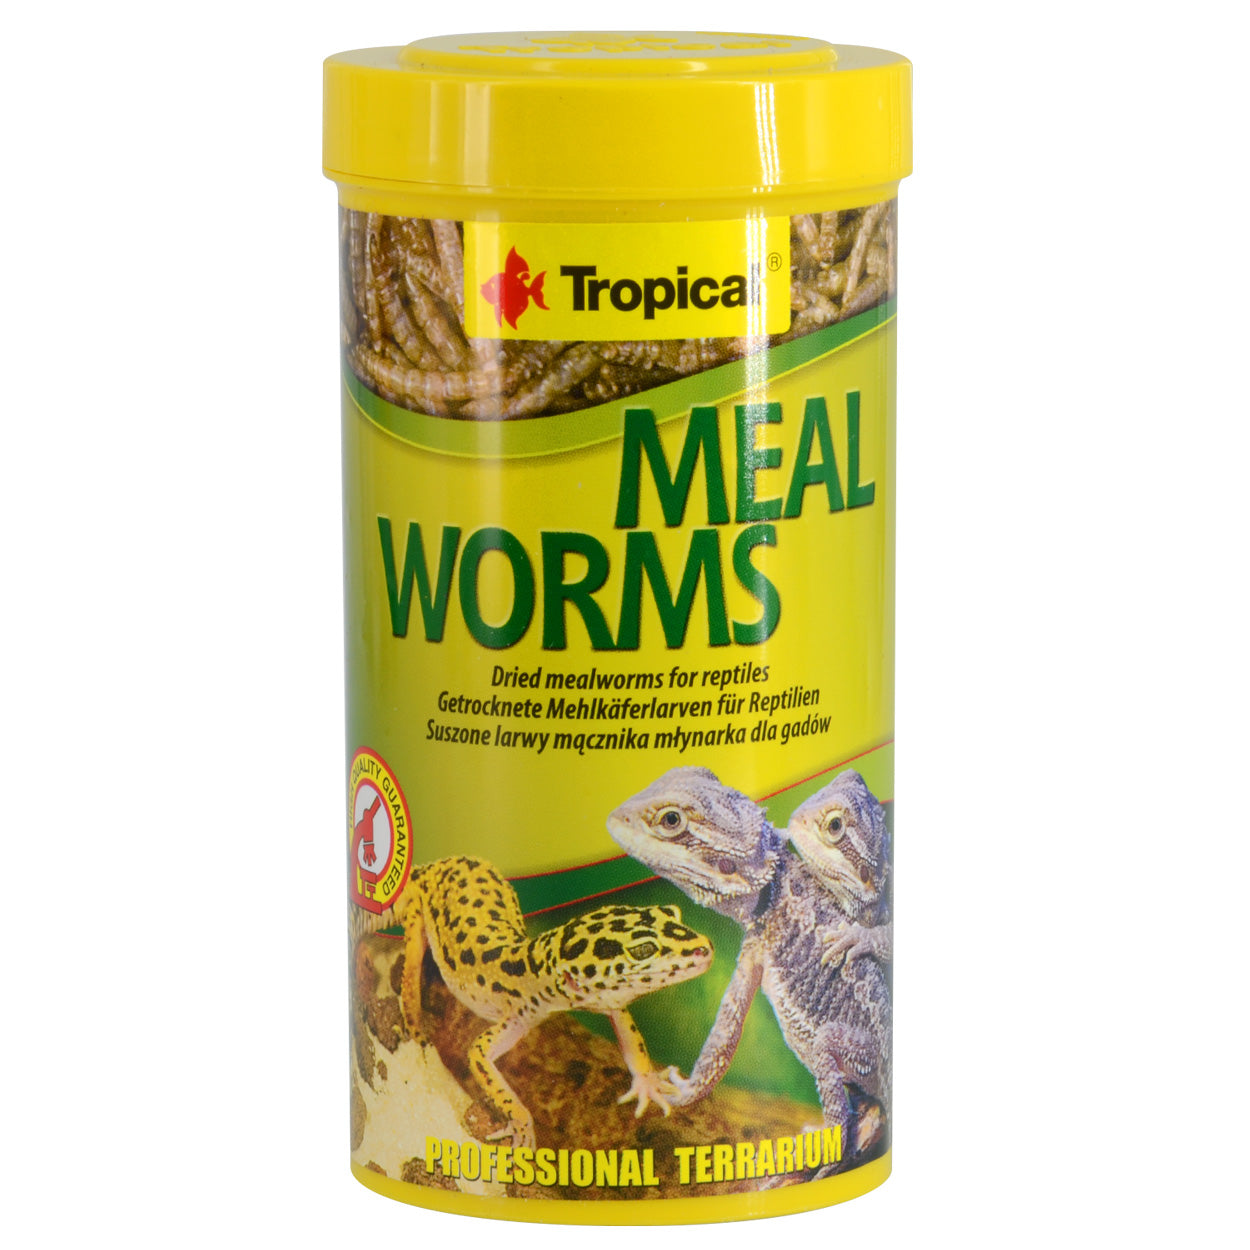 Tropical Dried Mealworms - 30 g